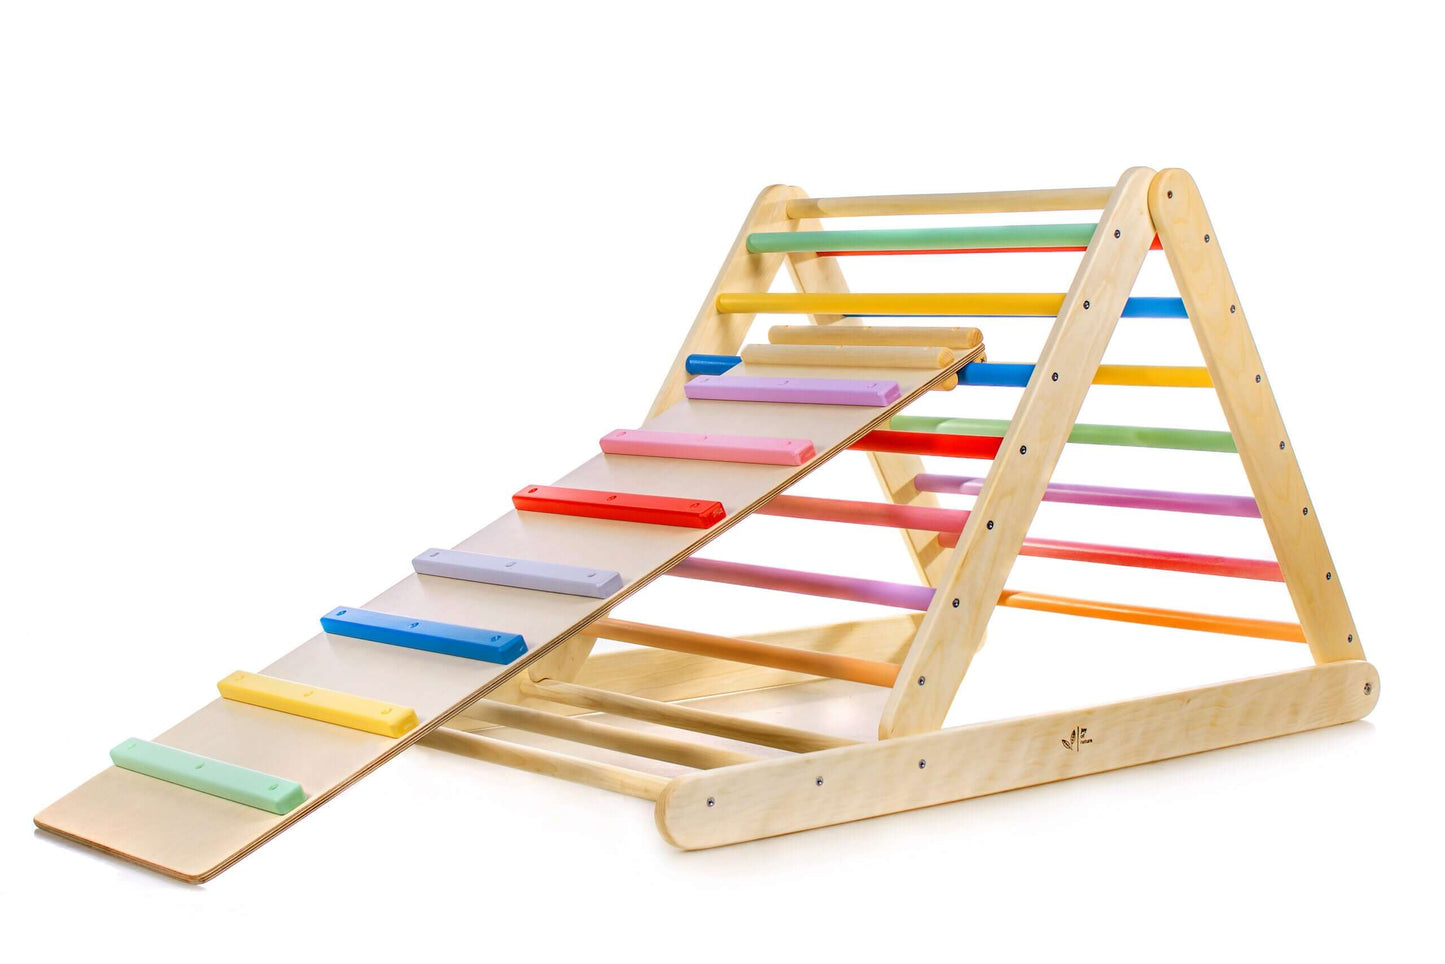 Adjustable climbing triangle for children, various colors